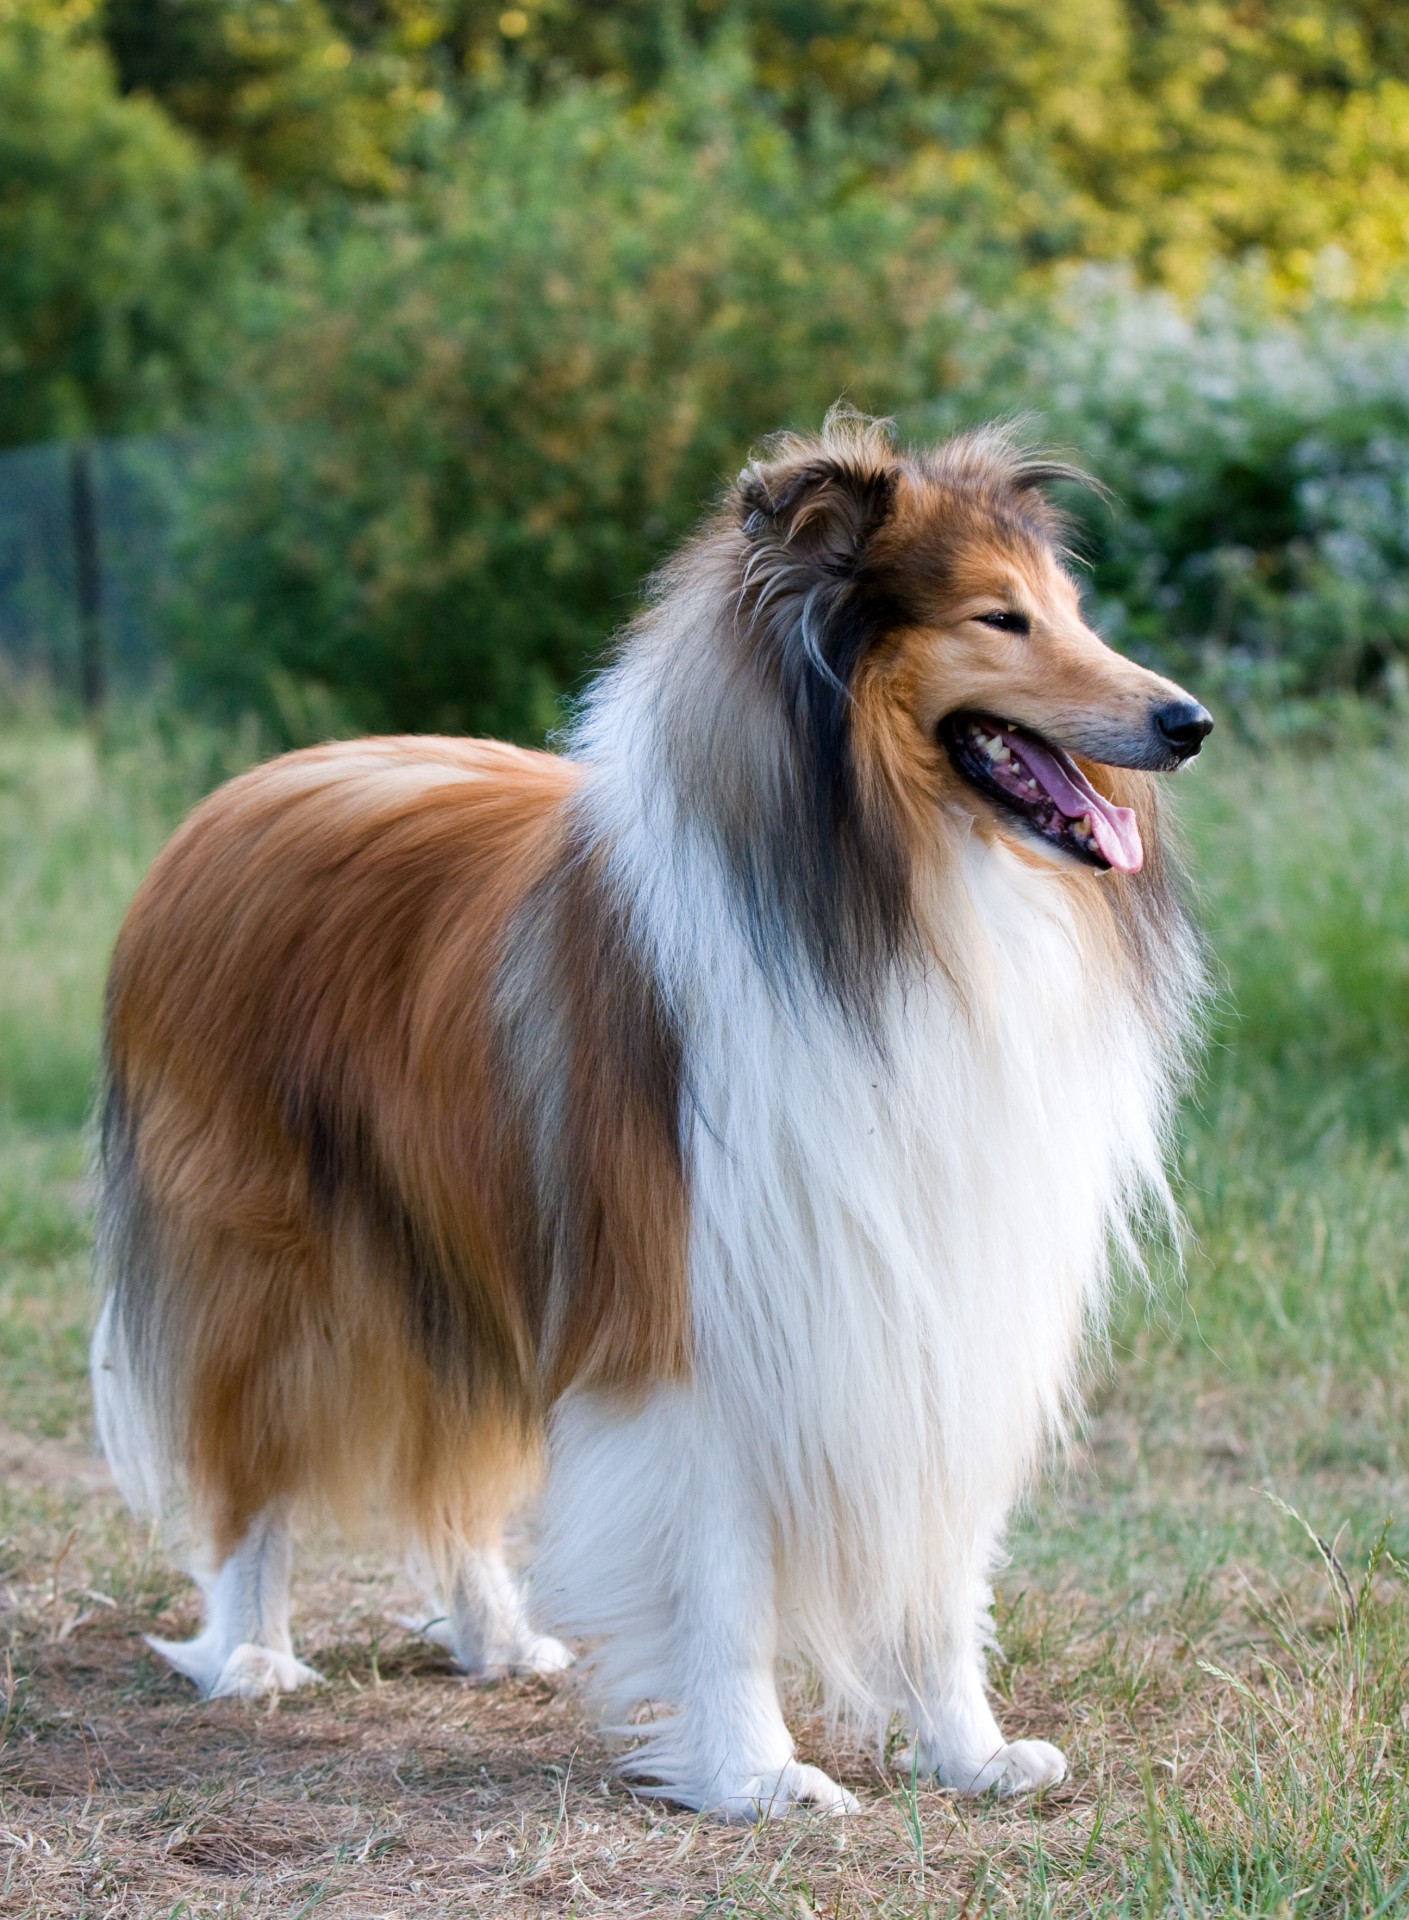 Portrait of a beautiful sable and white rough collie dog standing